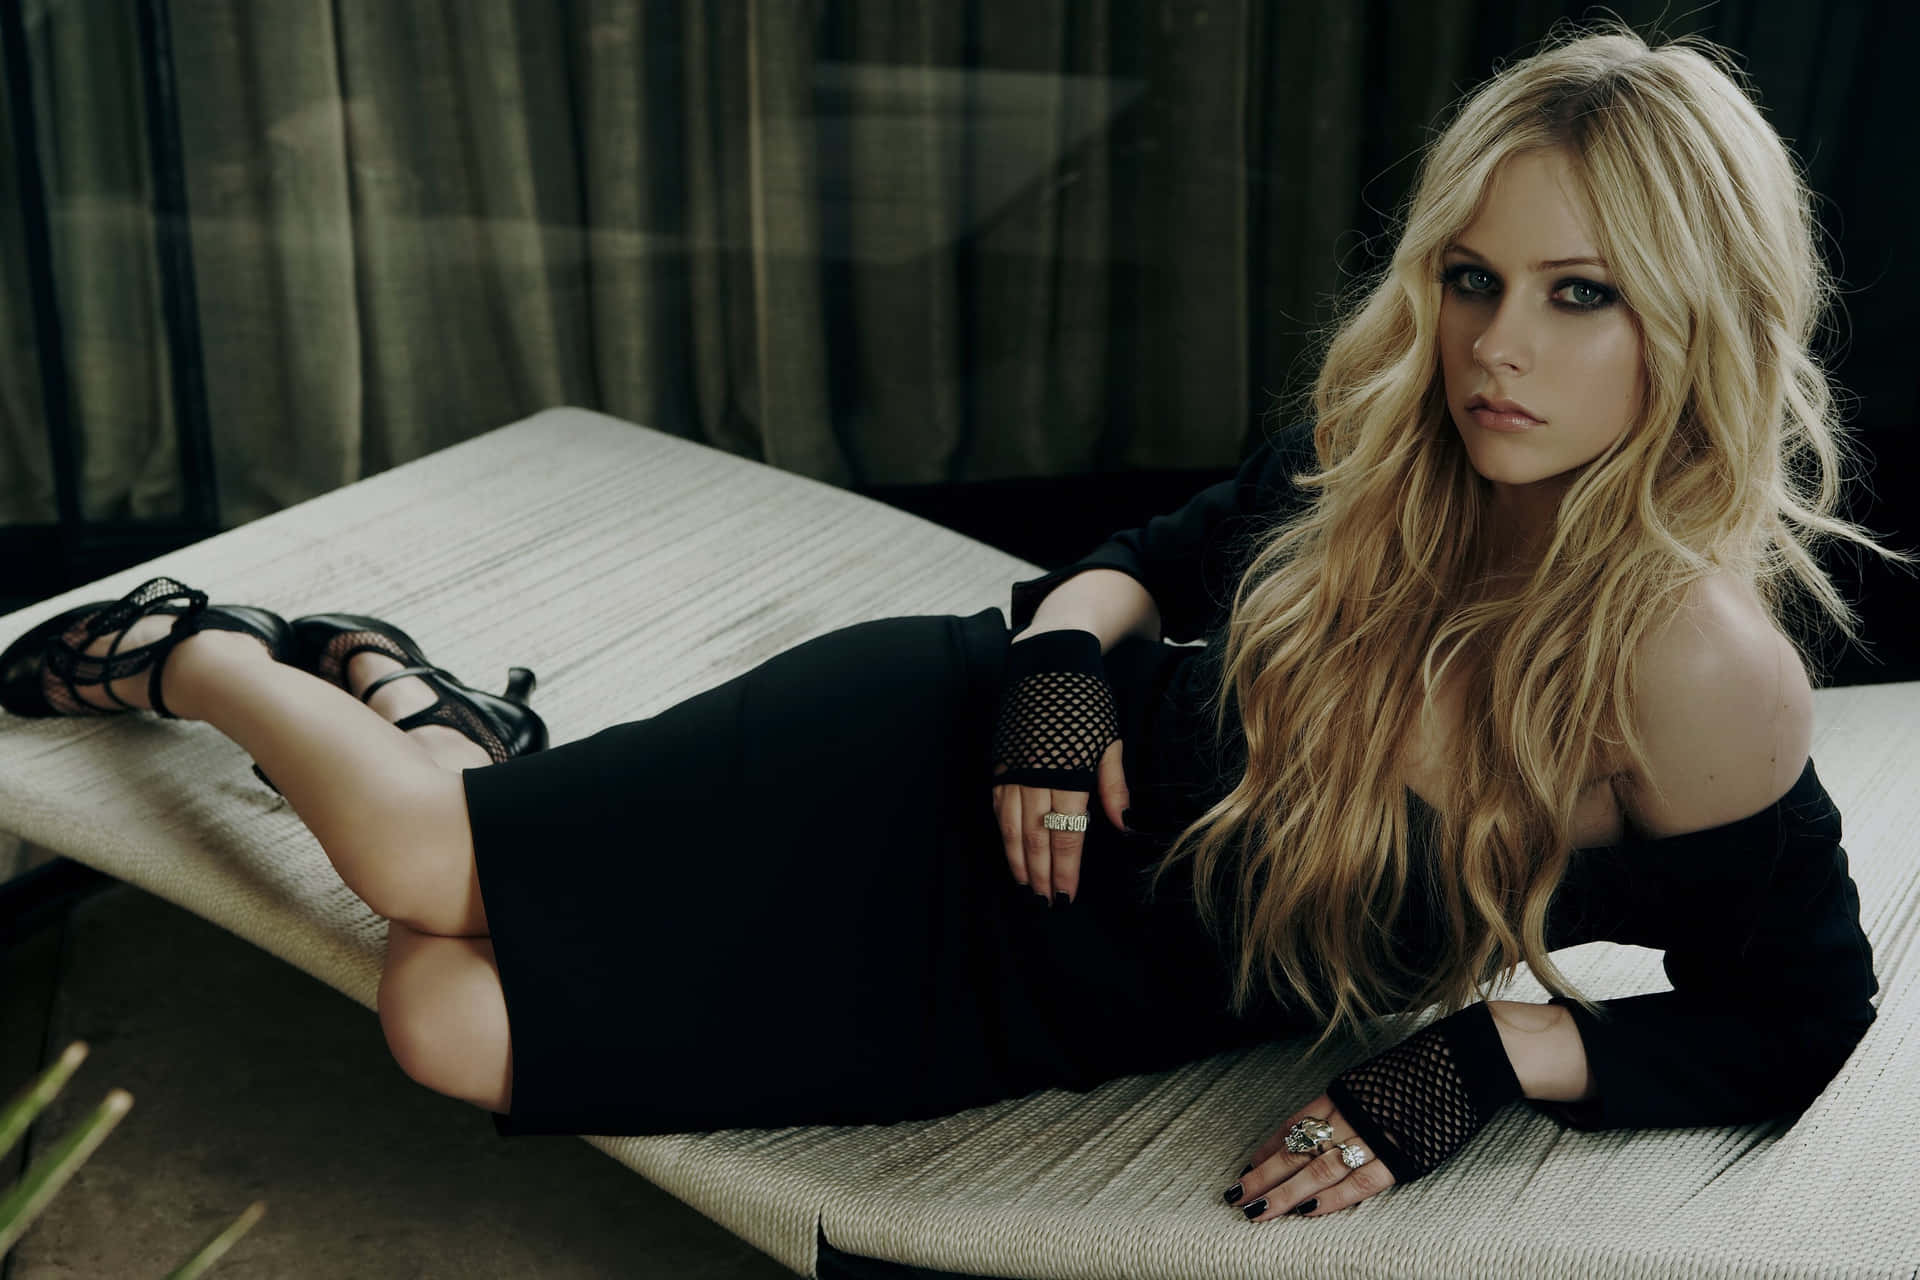 Pop star Avril Lavigne looks powerful and confident on stage